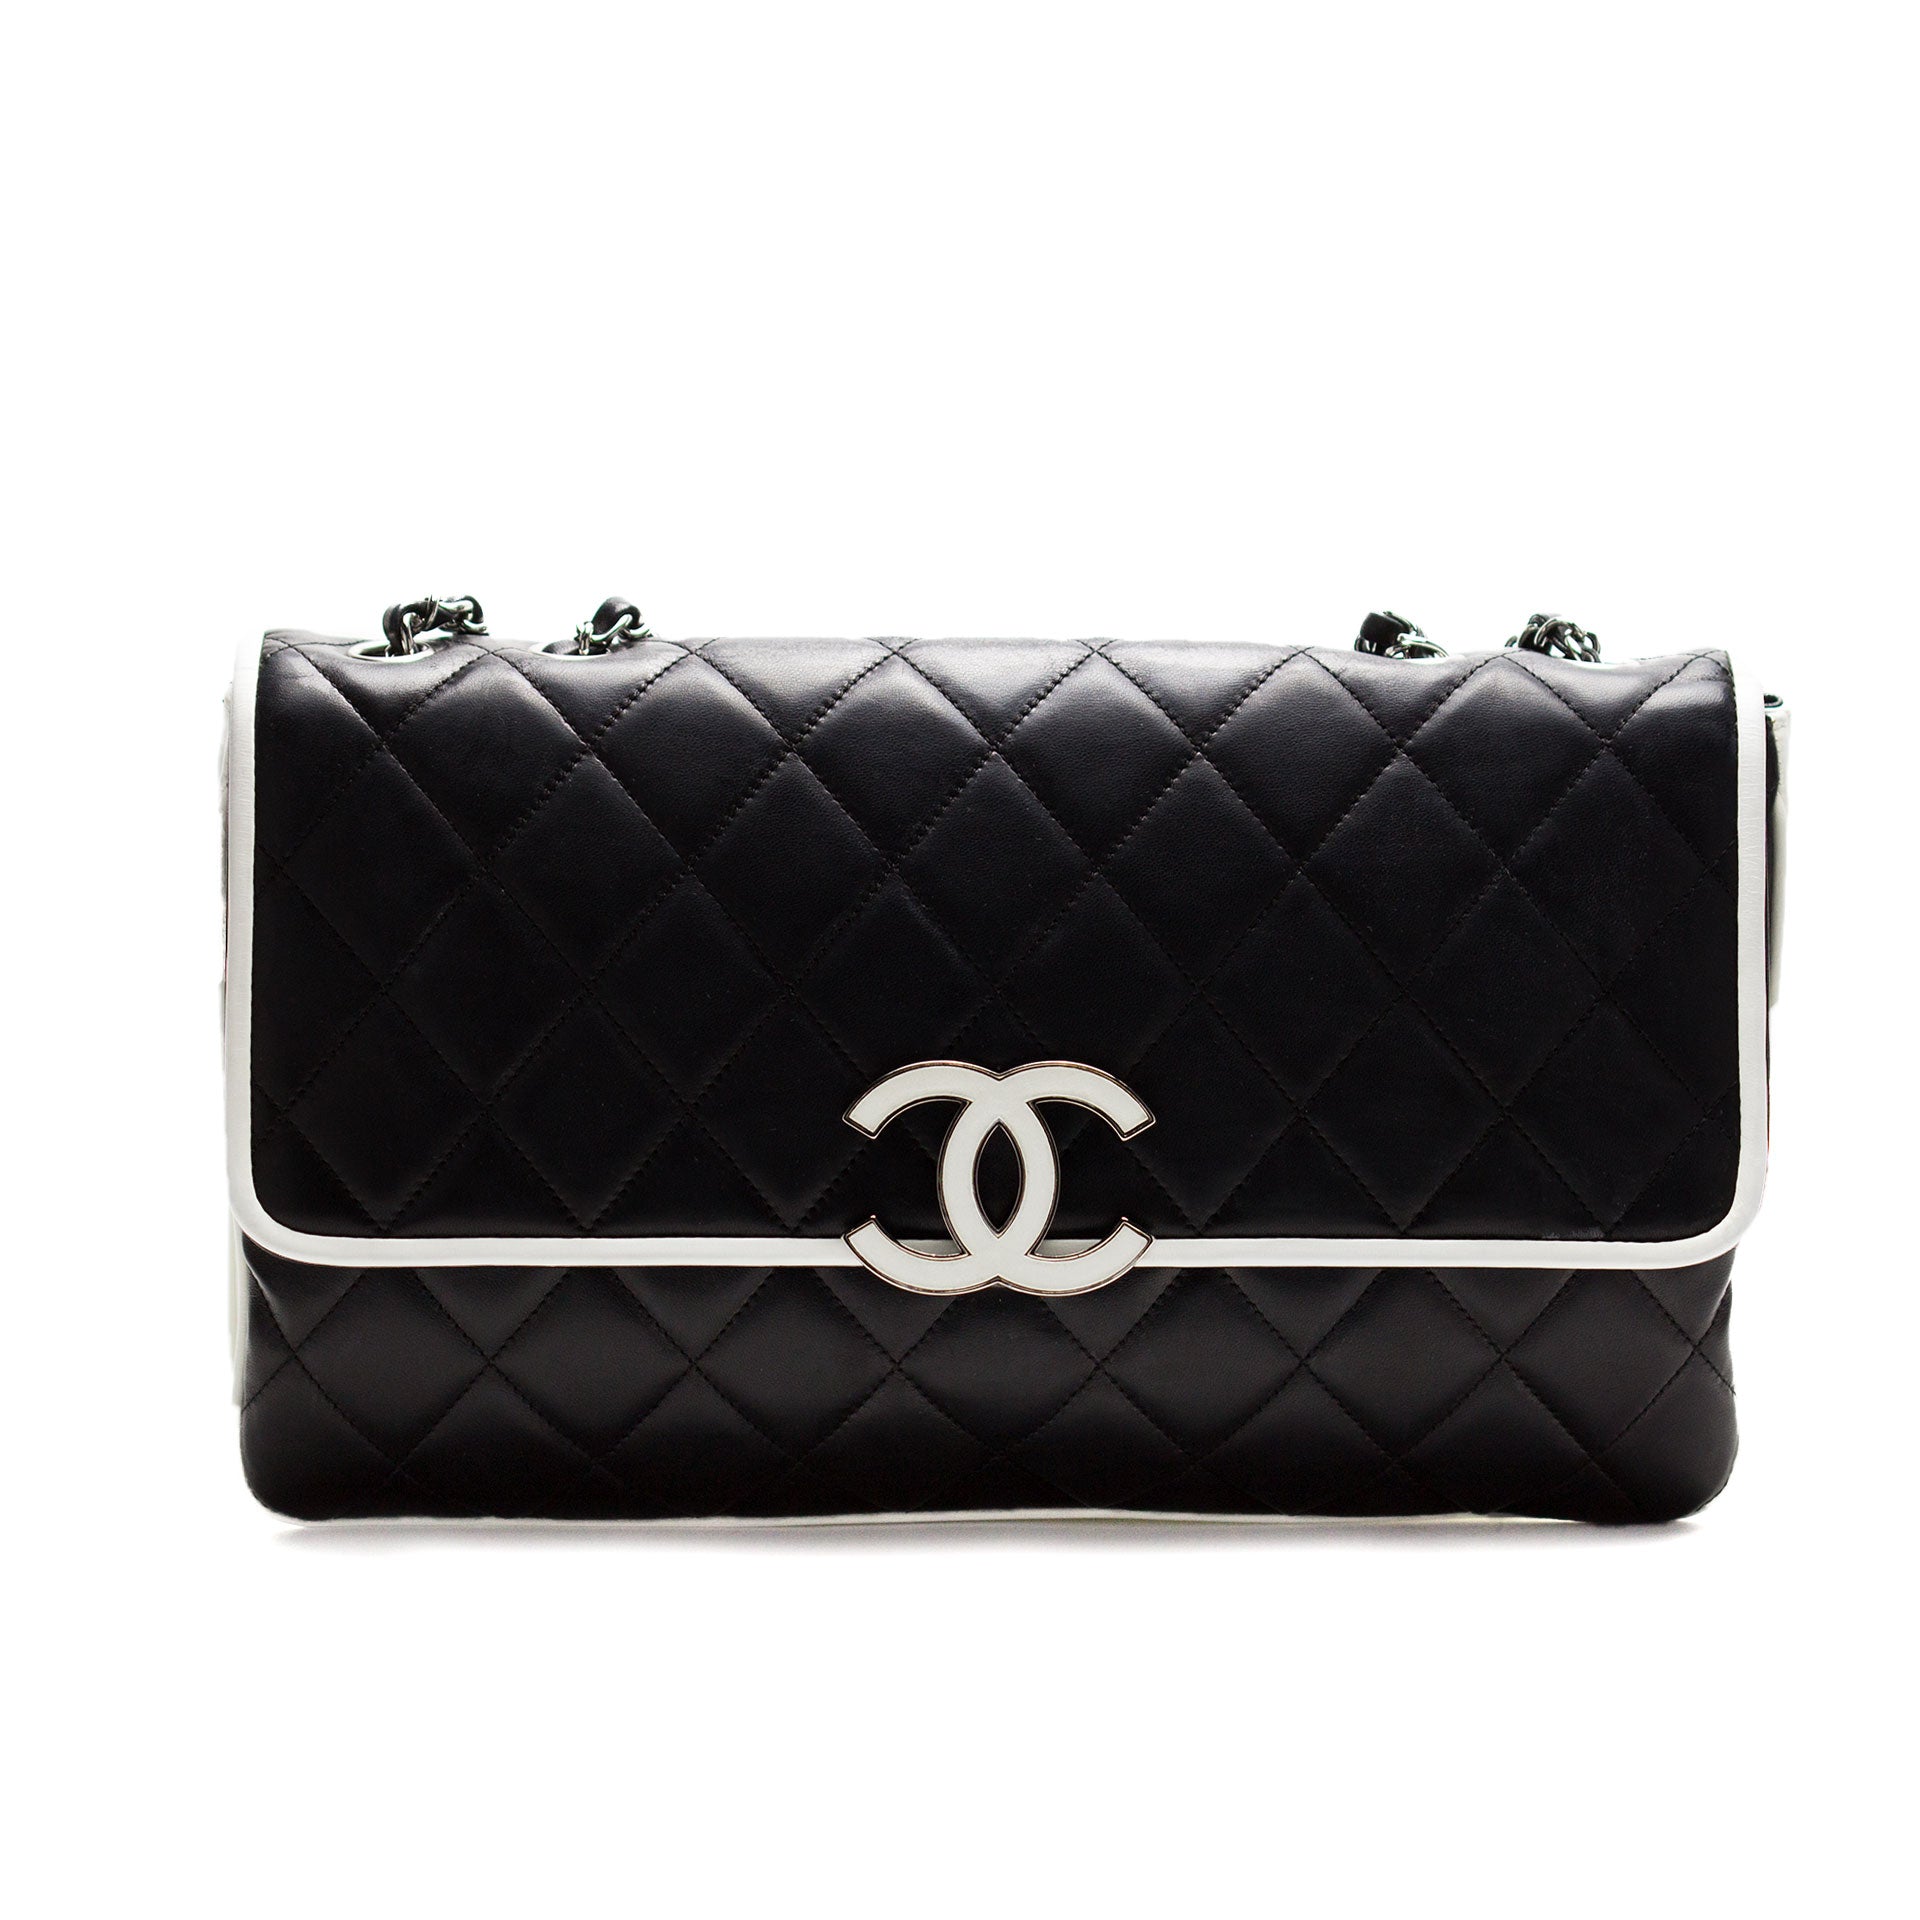 Authentic Chanel Medium Flap Bag Black And Ivory